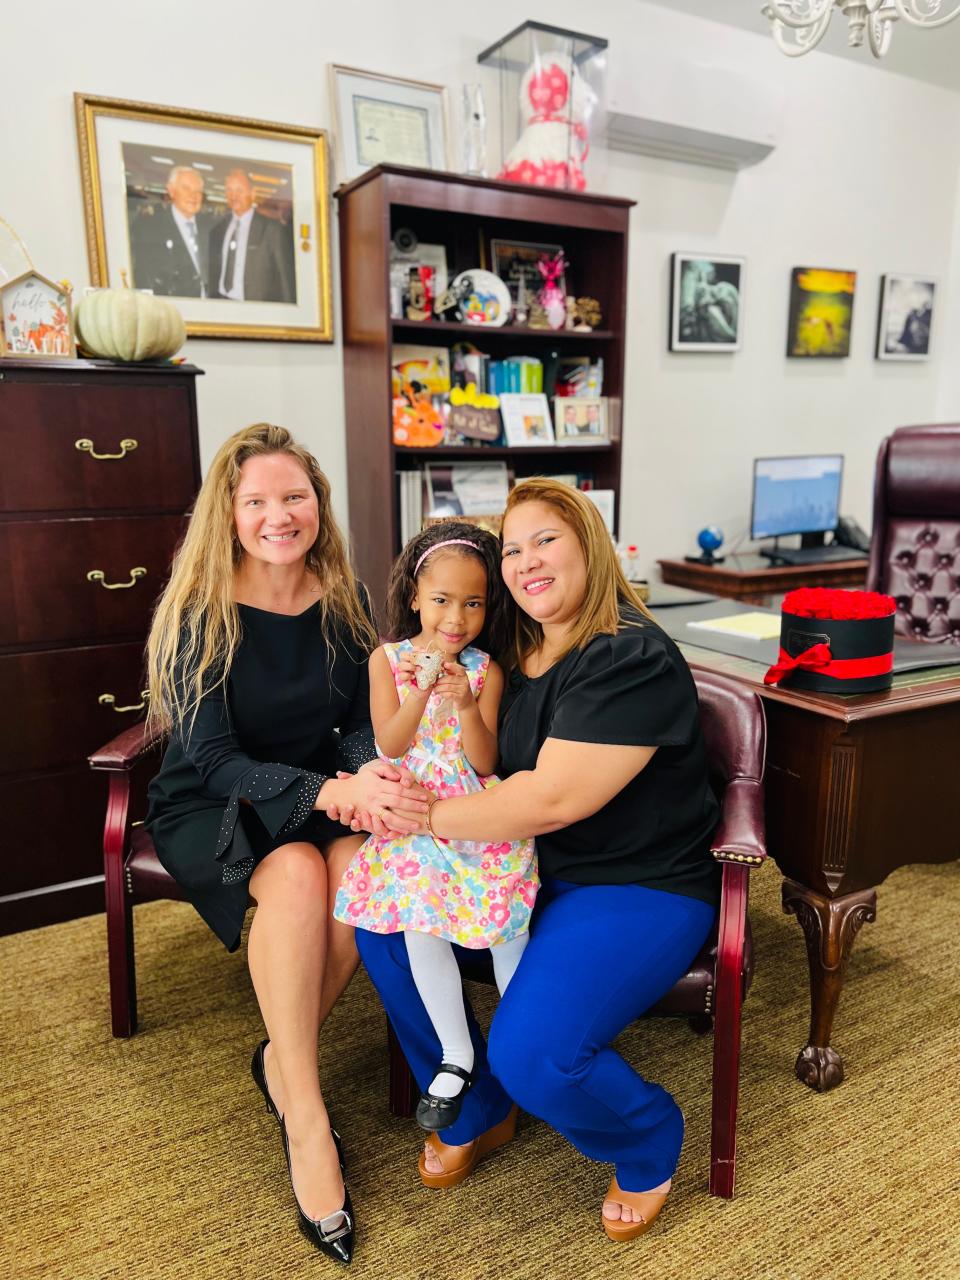 Attorney Gintare Grigaite, left, four-year-old Caroline Andra Arroyo Polanco, and her mother, Betsaida Dilenia Polanco Polonia at Gritaite’s law offices